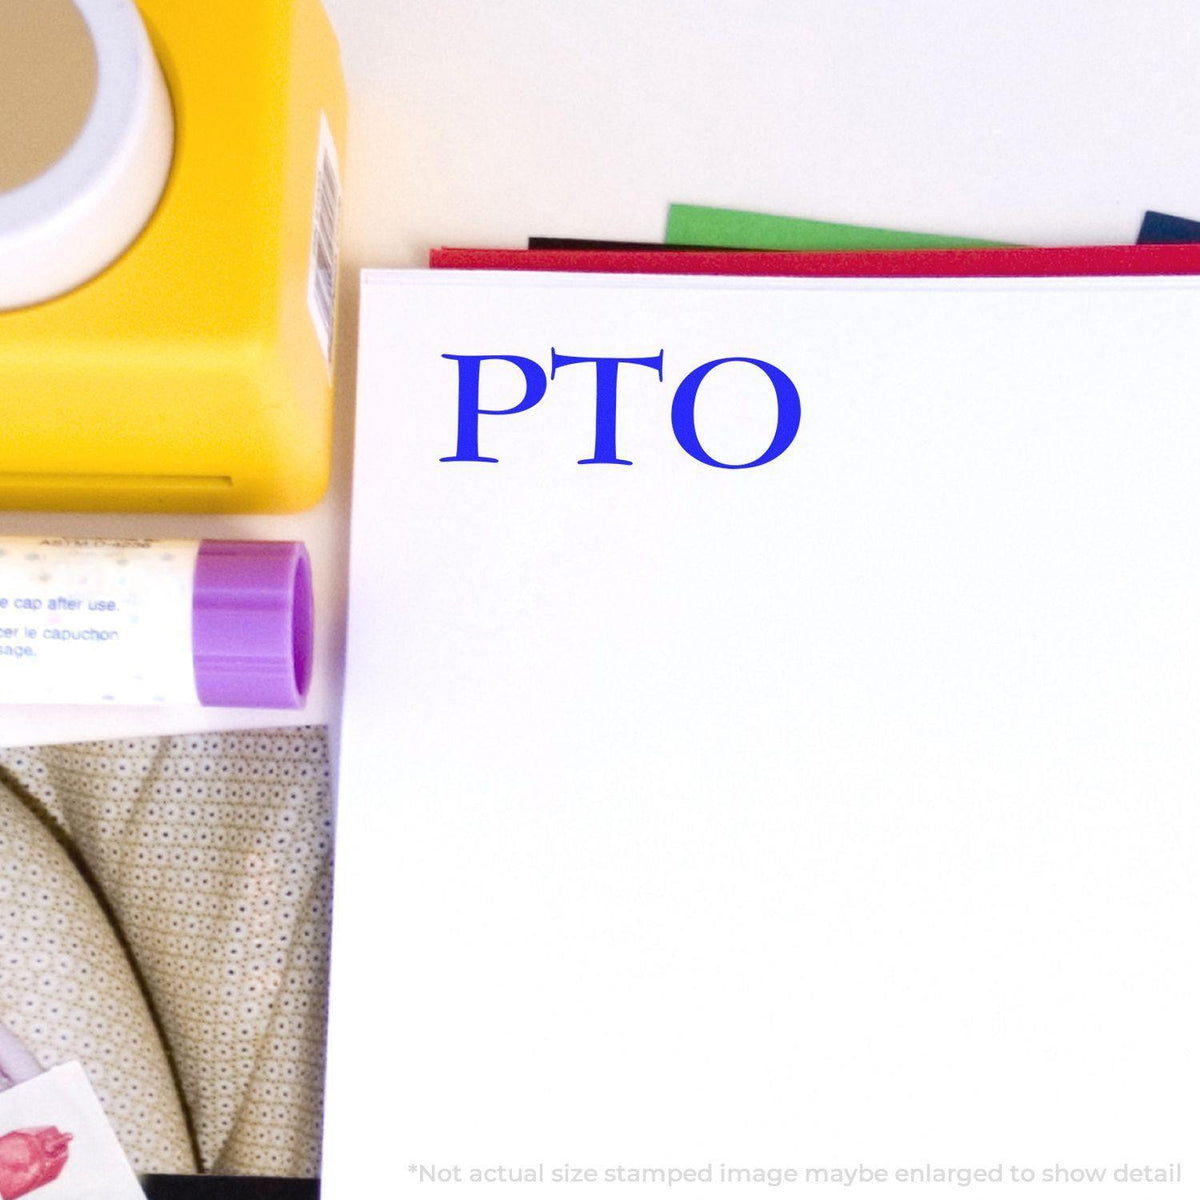 Large PTO Rubber Stamp In Use Photo